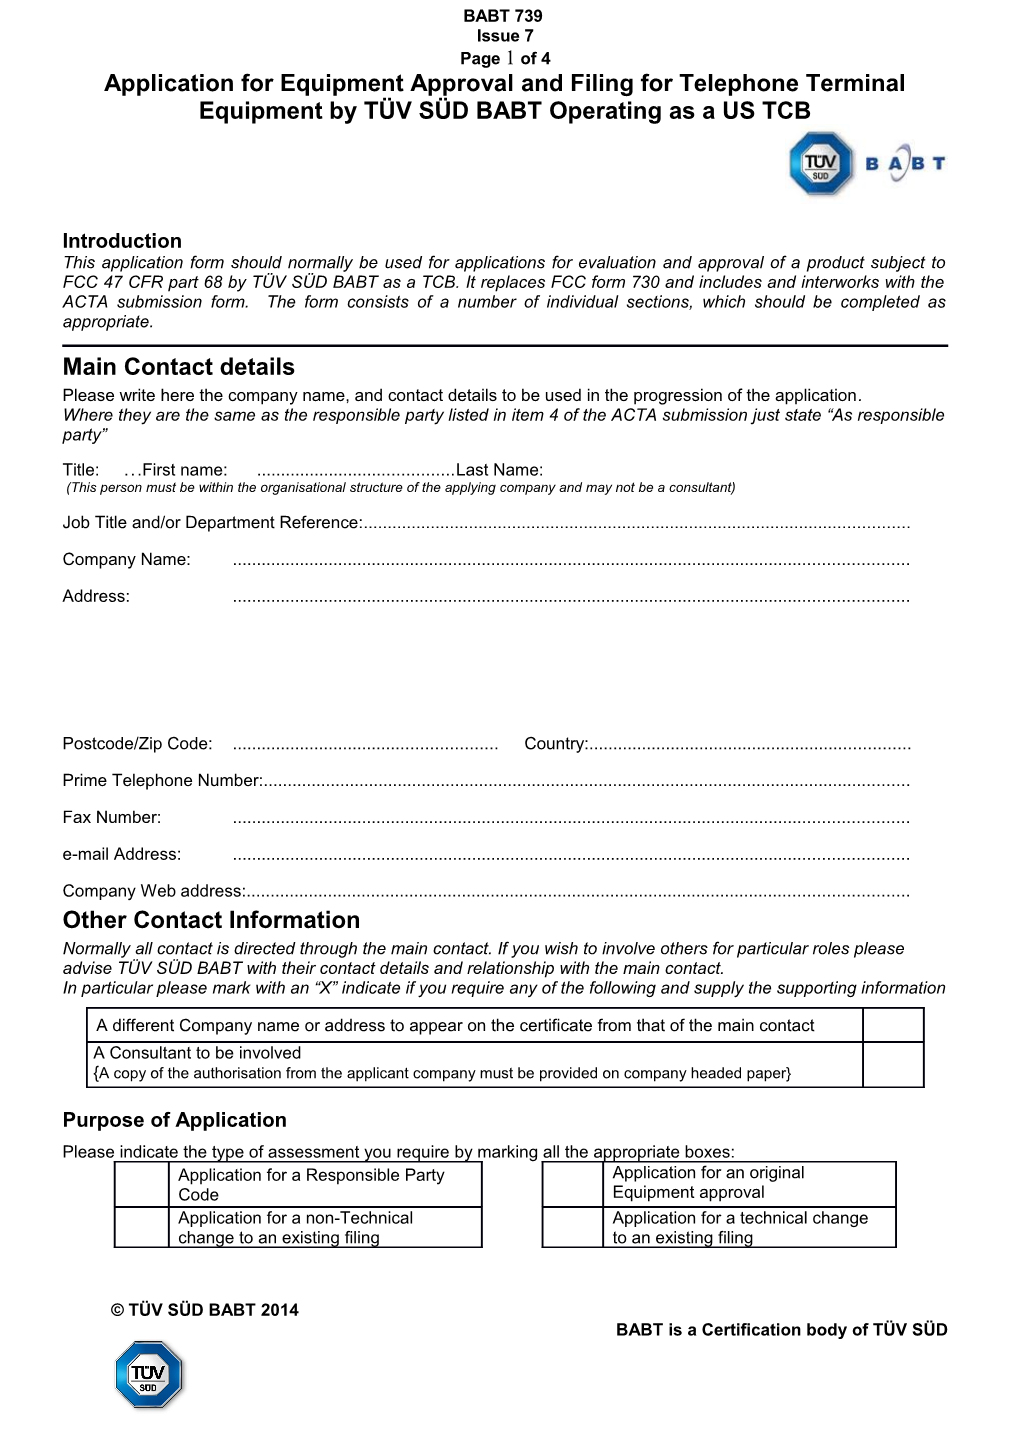 Application for Equipment Approval and Filing for Telephone Terminal Equipment by TÜV SÜD